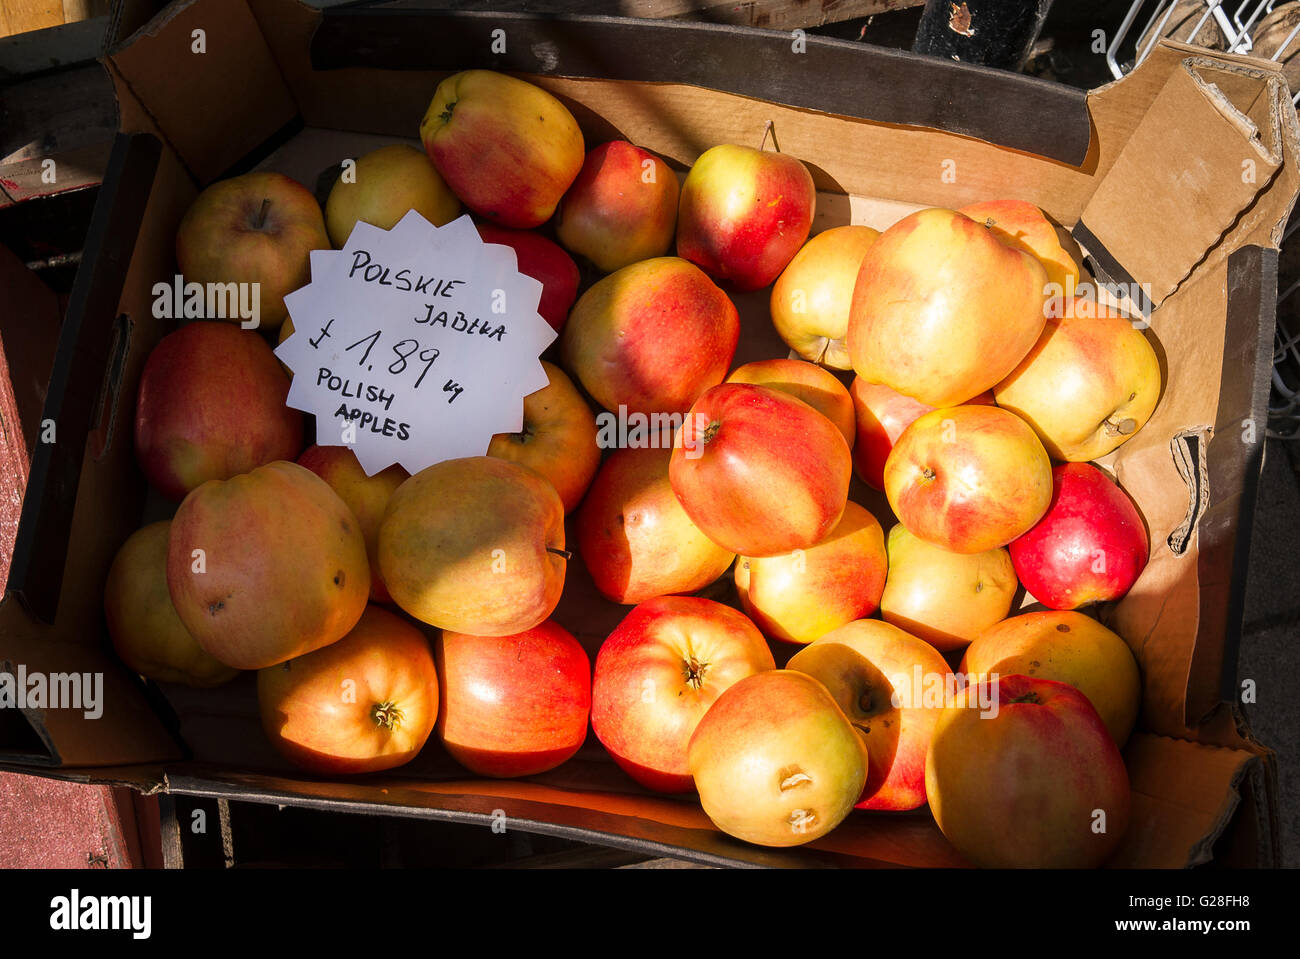 A box of Polish apples outside a specialist deli shop in Devizes UK Stock Photo